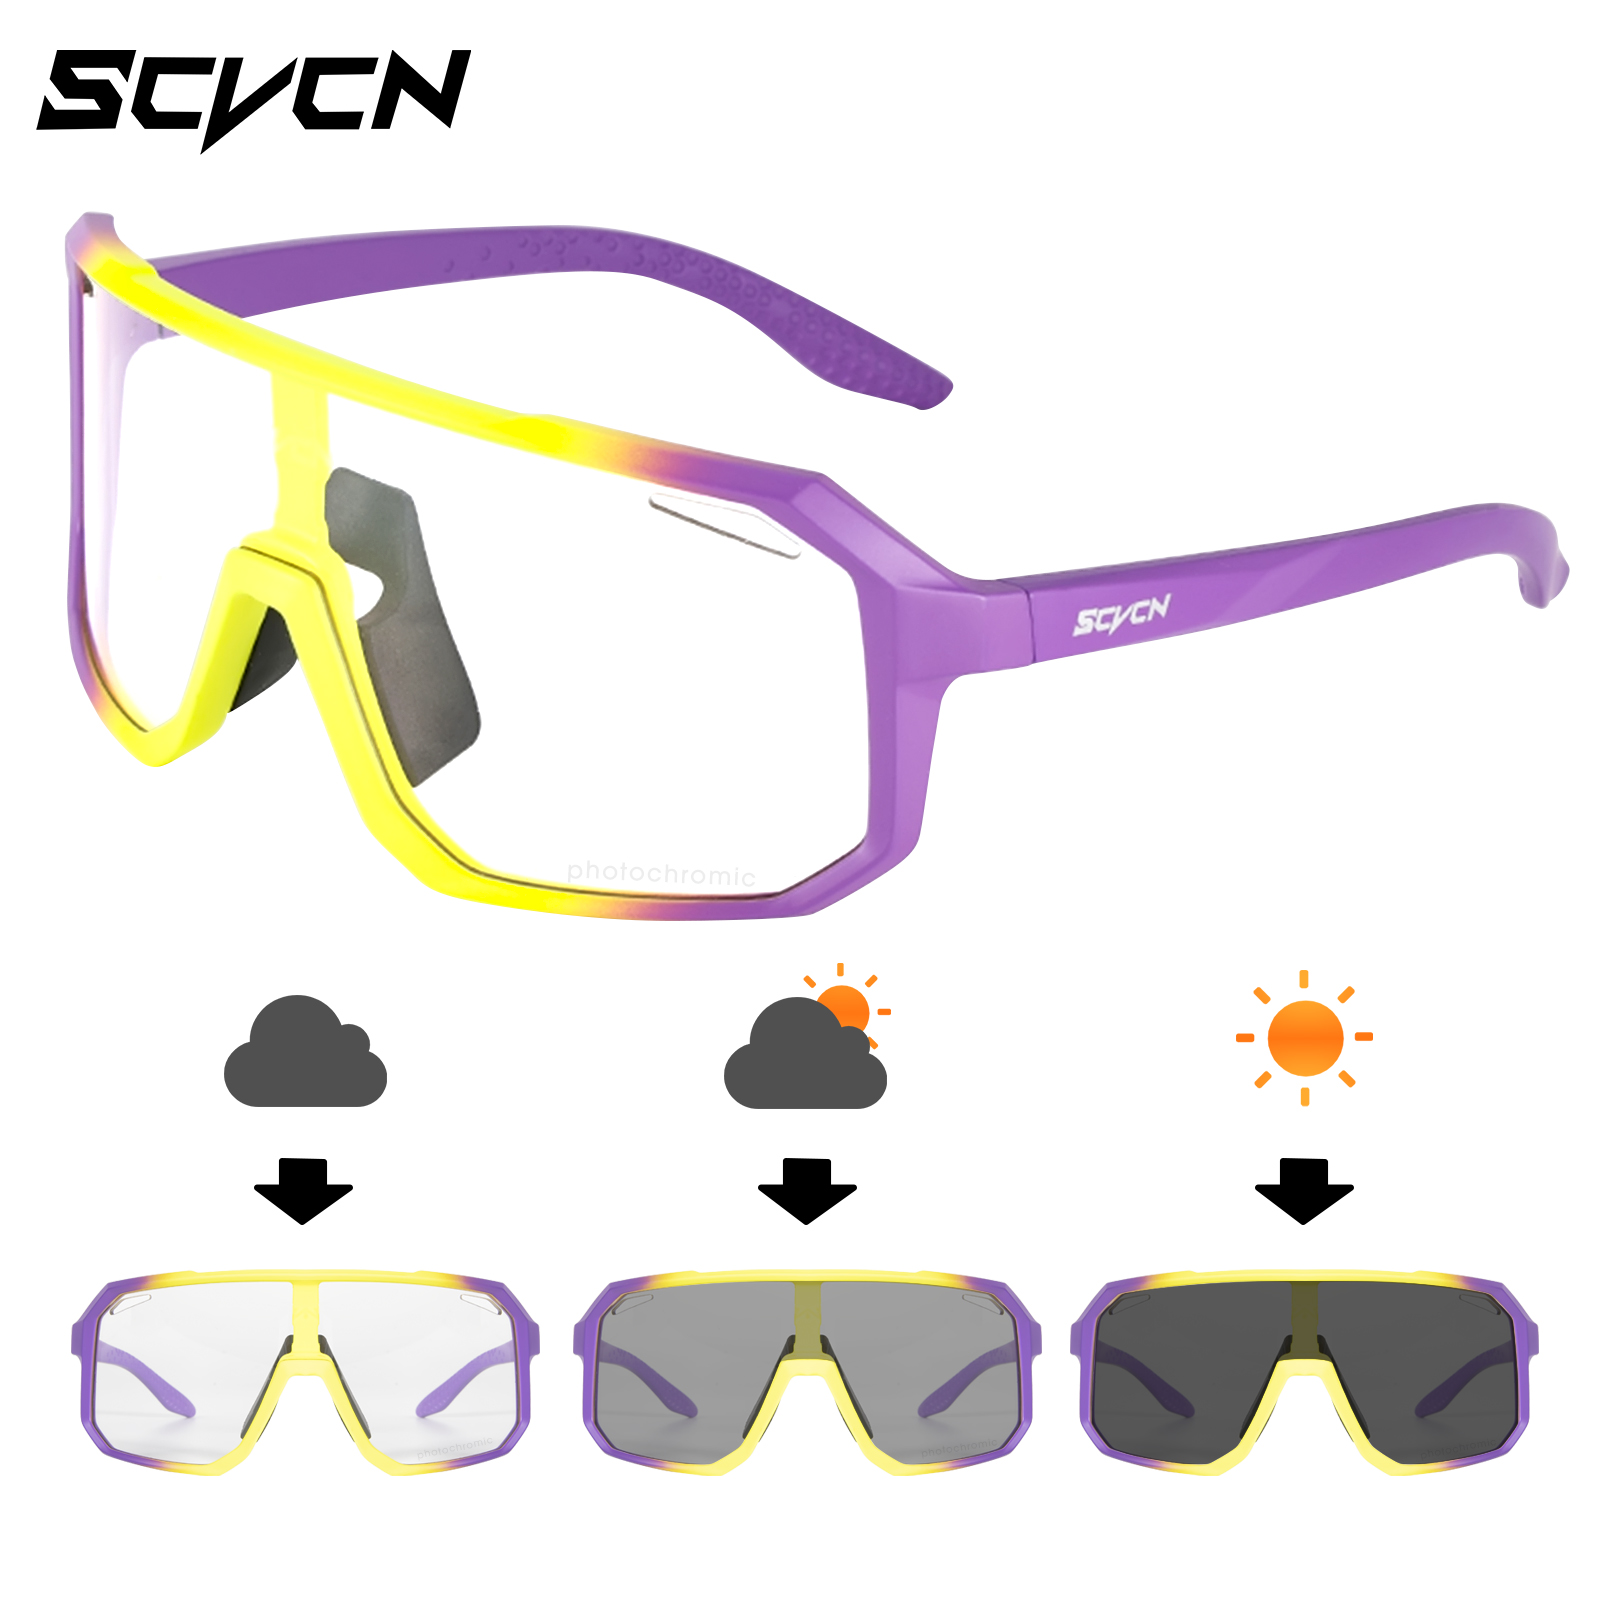 

Scvcn, Premium Cool Fantasy Photochromic Fashion Glasses, Windproof Wrap Around One-piece Goggles, For Men Women Outdoor Sports Party Vacation Travel Driving Fishing Cycling Supply Photo Prop